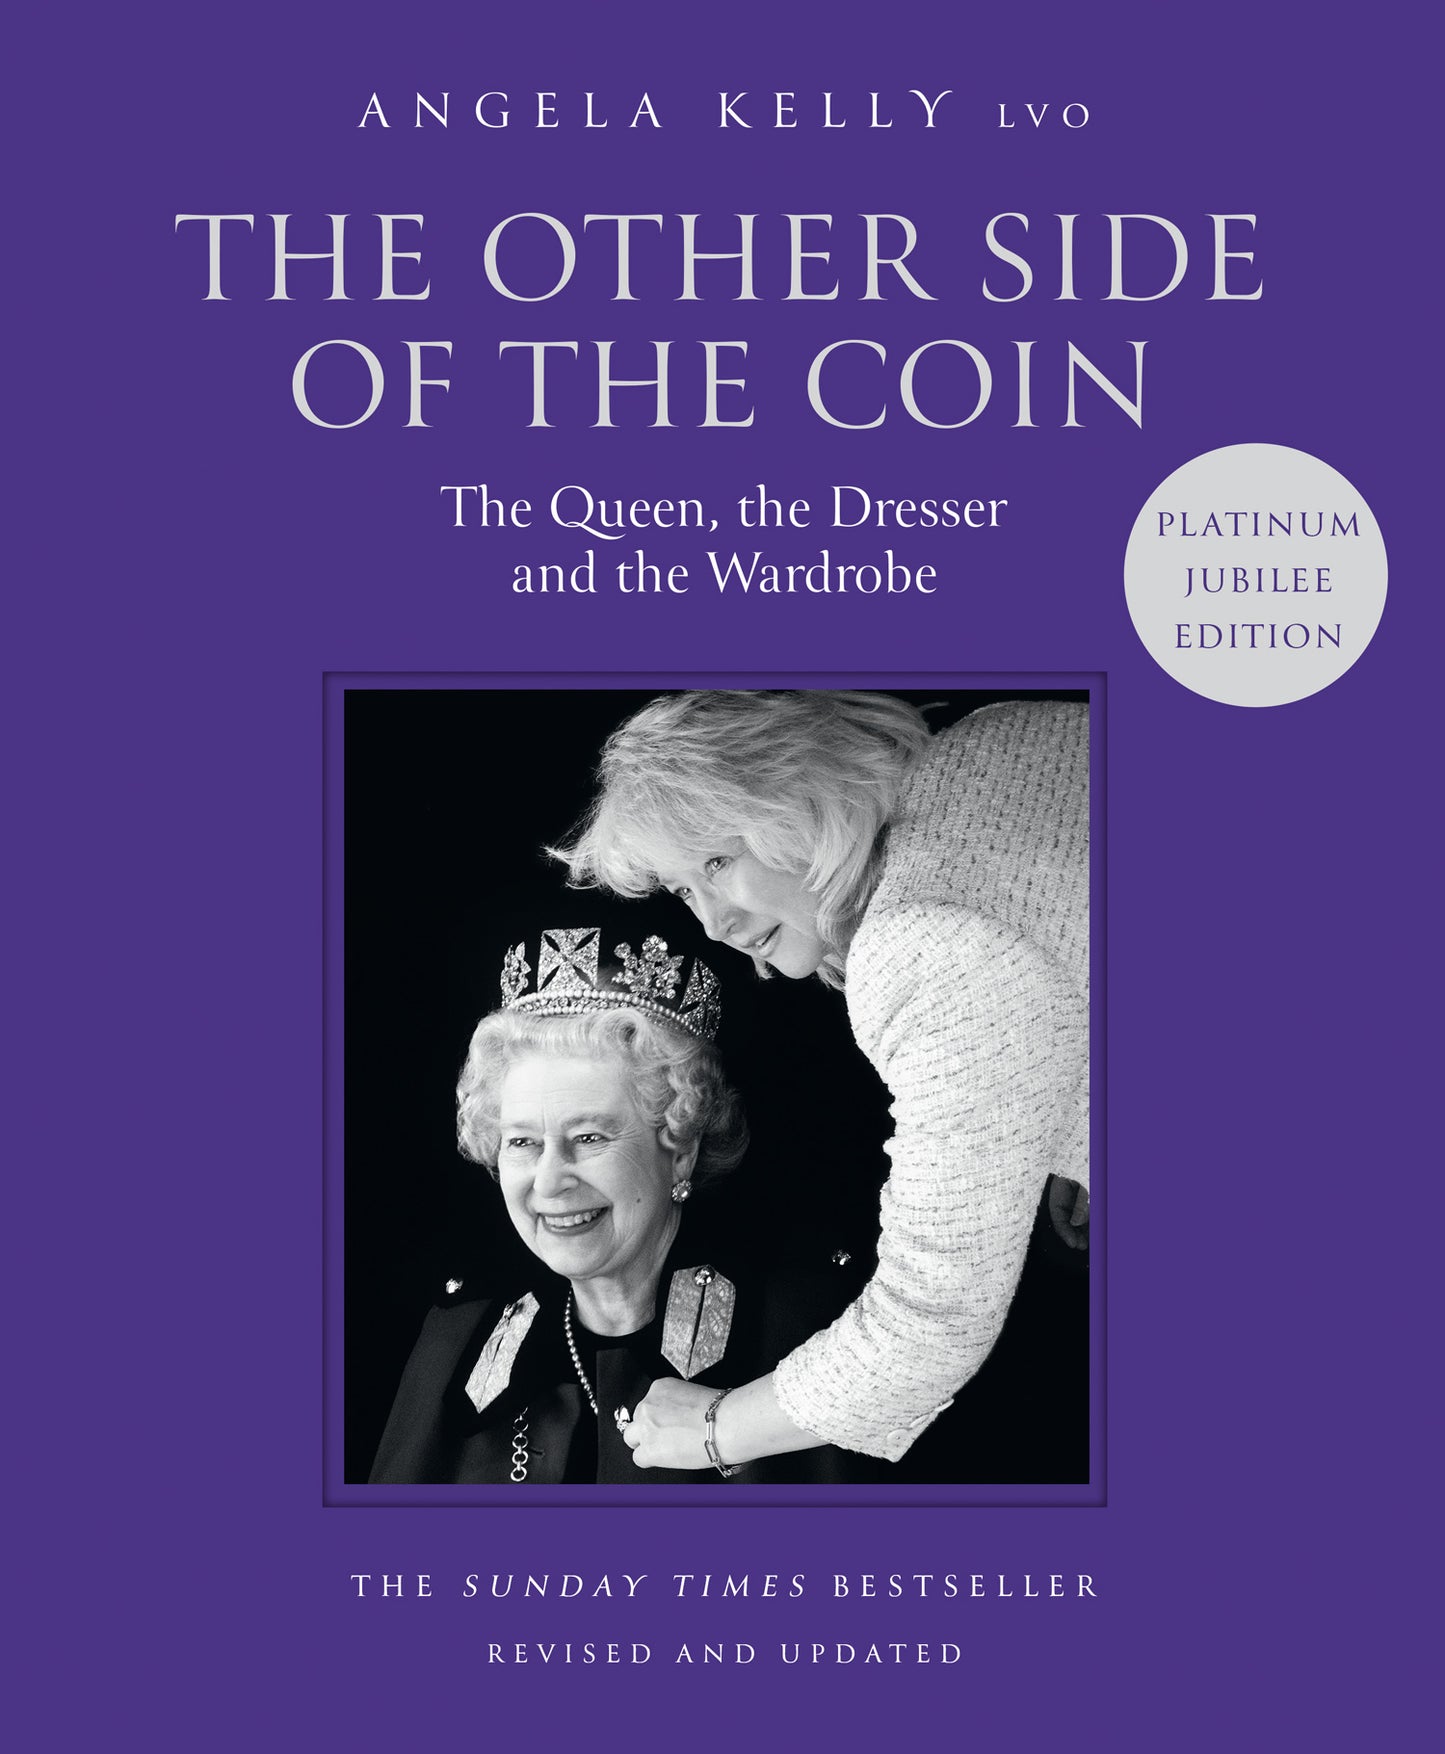 The Other Side of the Coin Angela Kelly